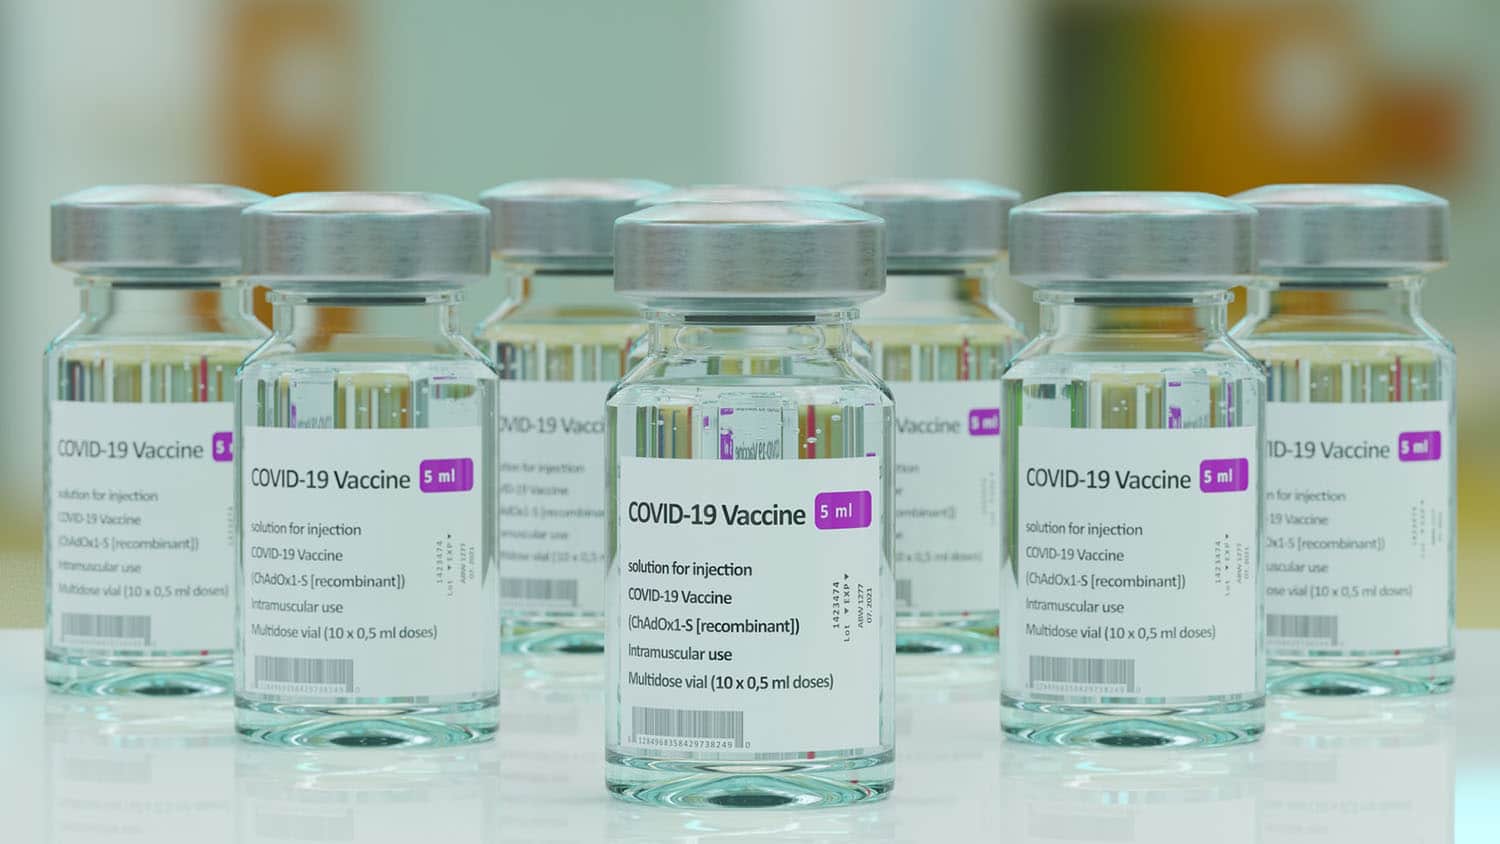 vials of covid-19 vaccine sit on a counter